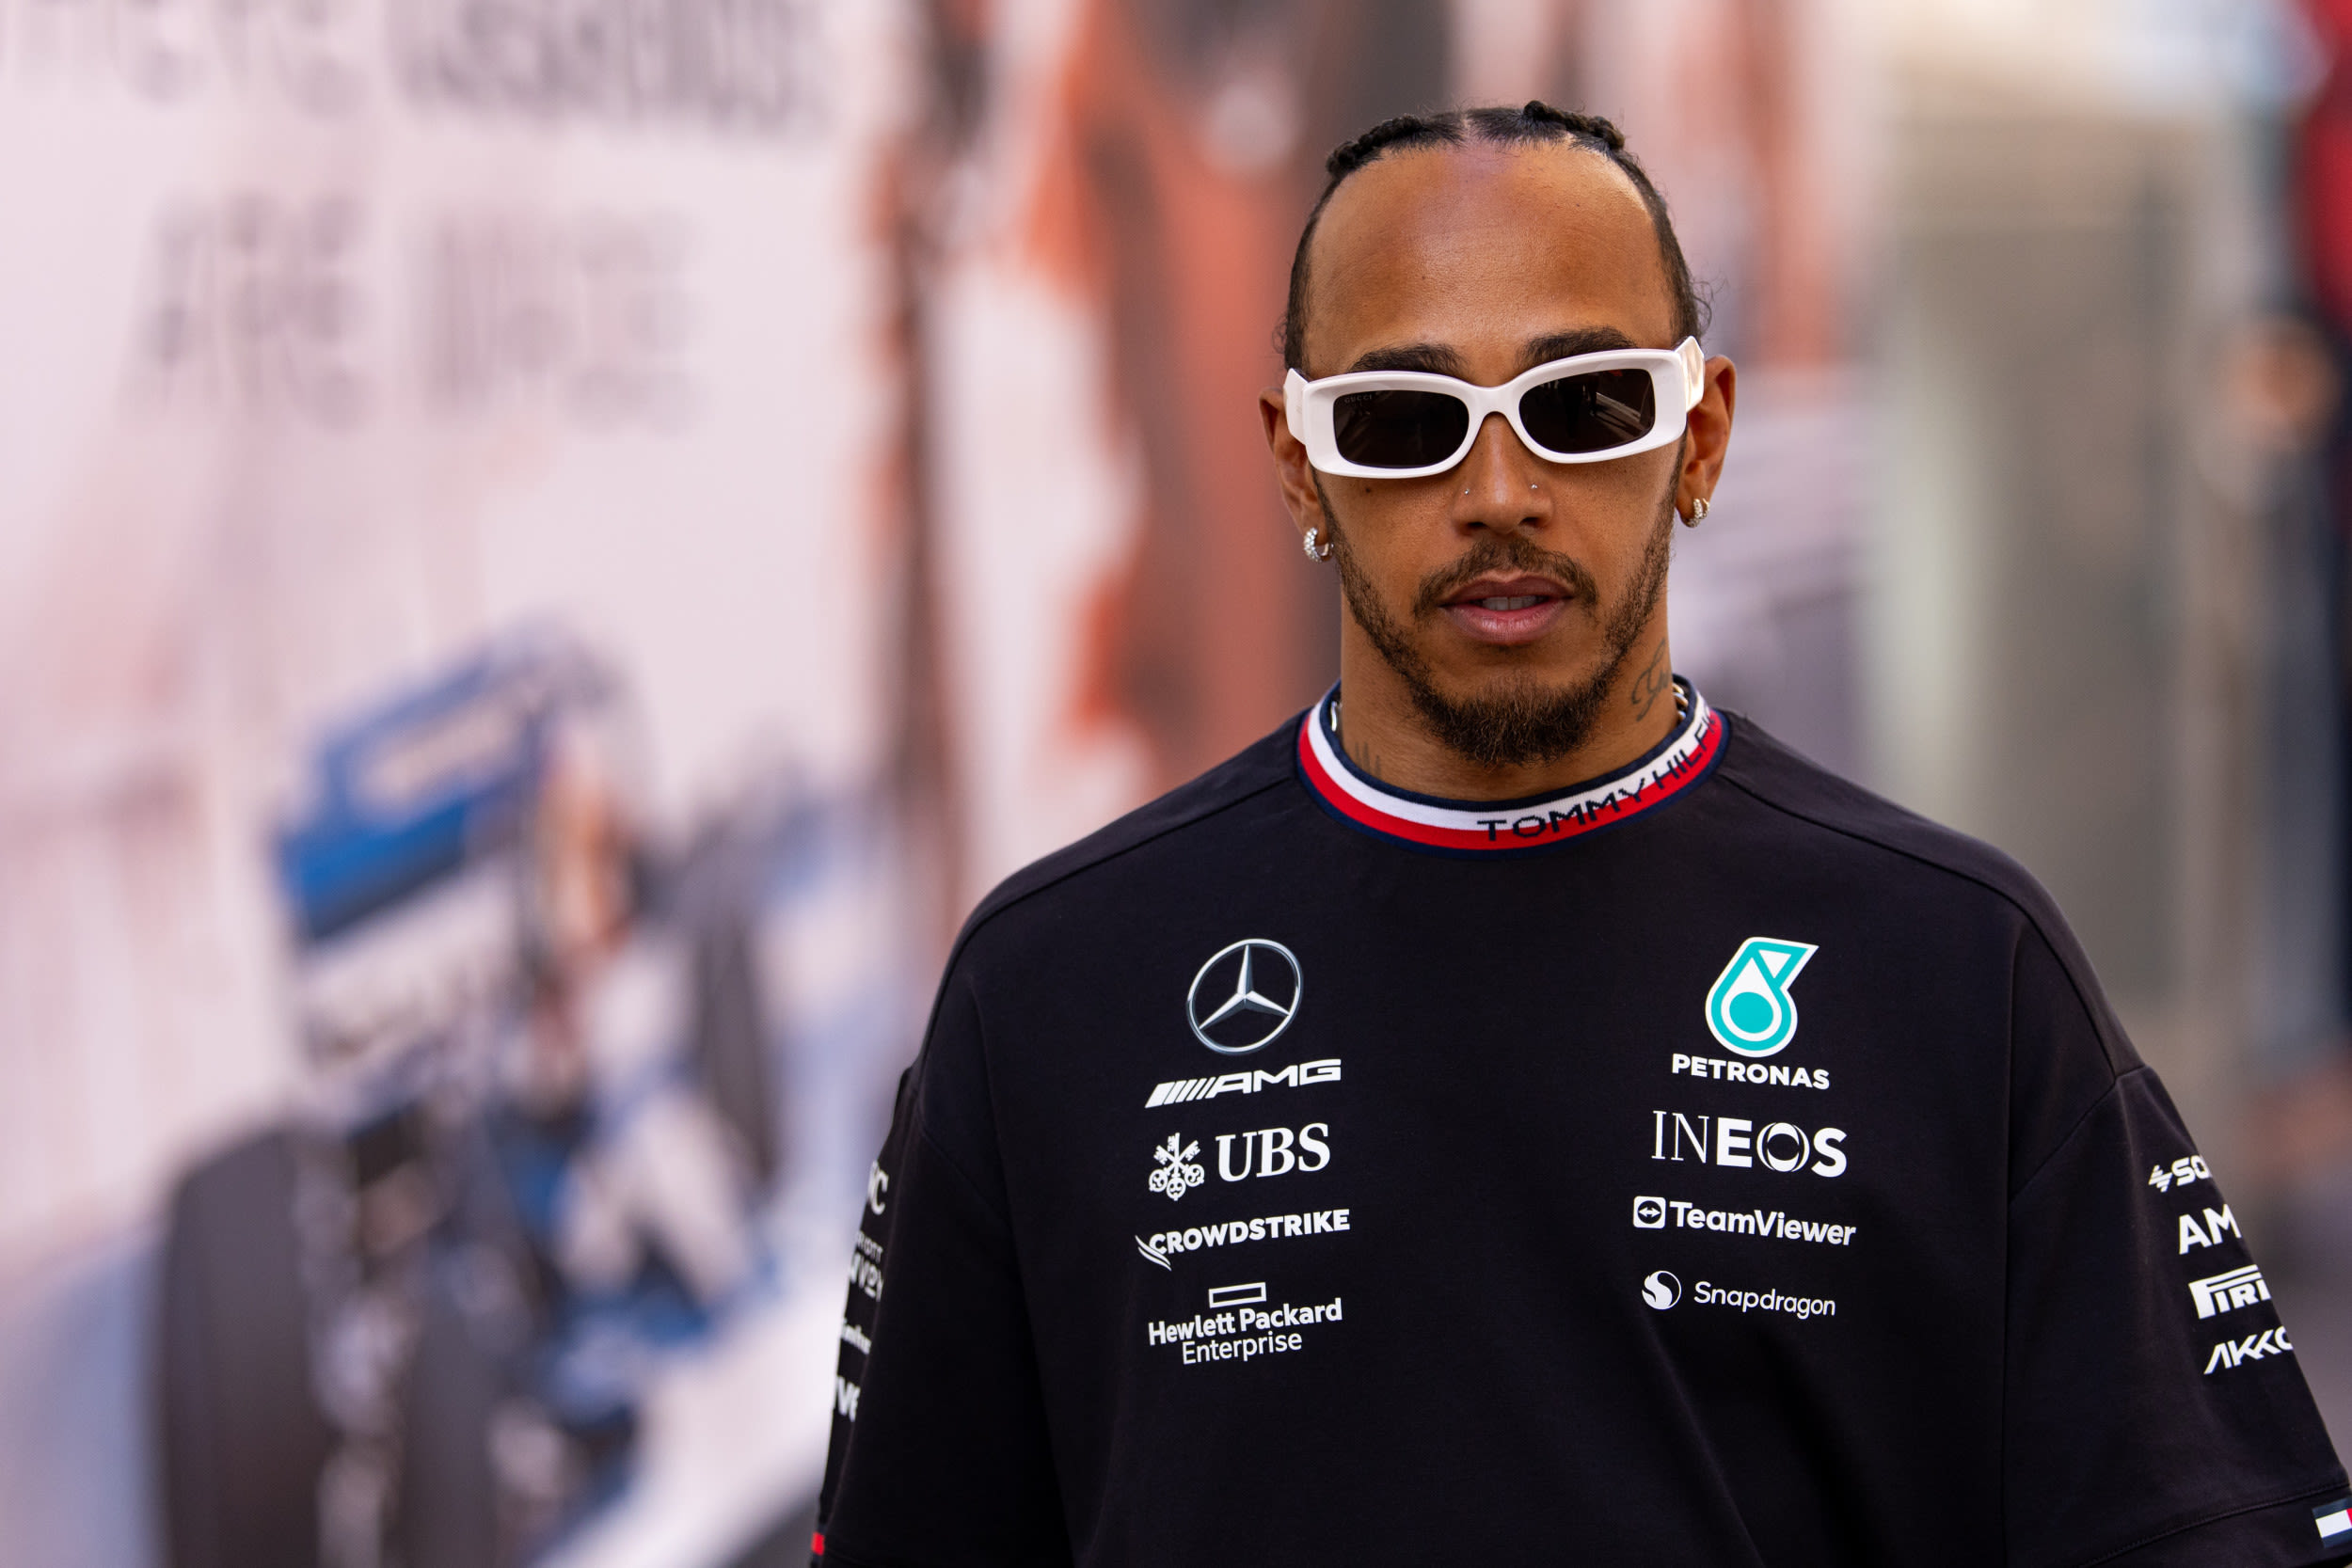 Lewis Hamilton speaks out on near-death experience